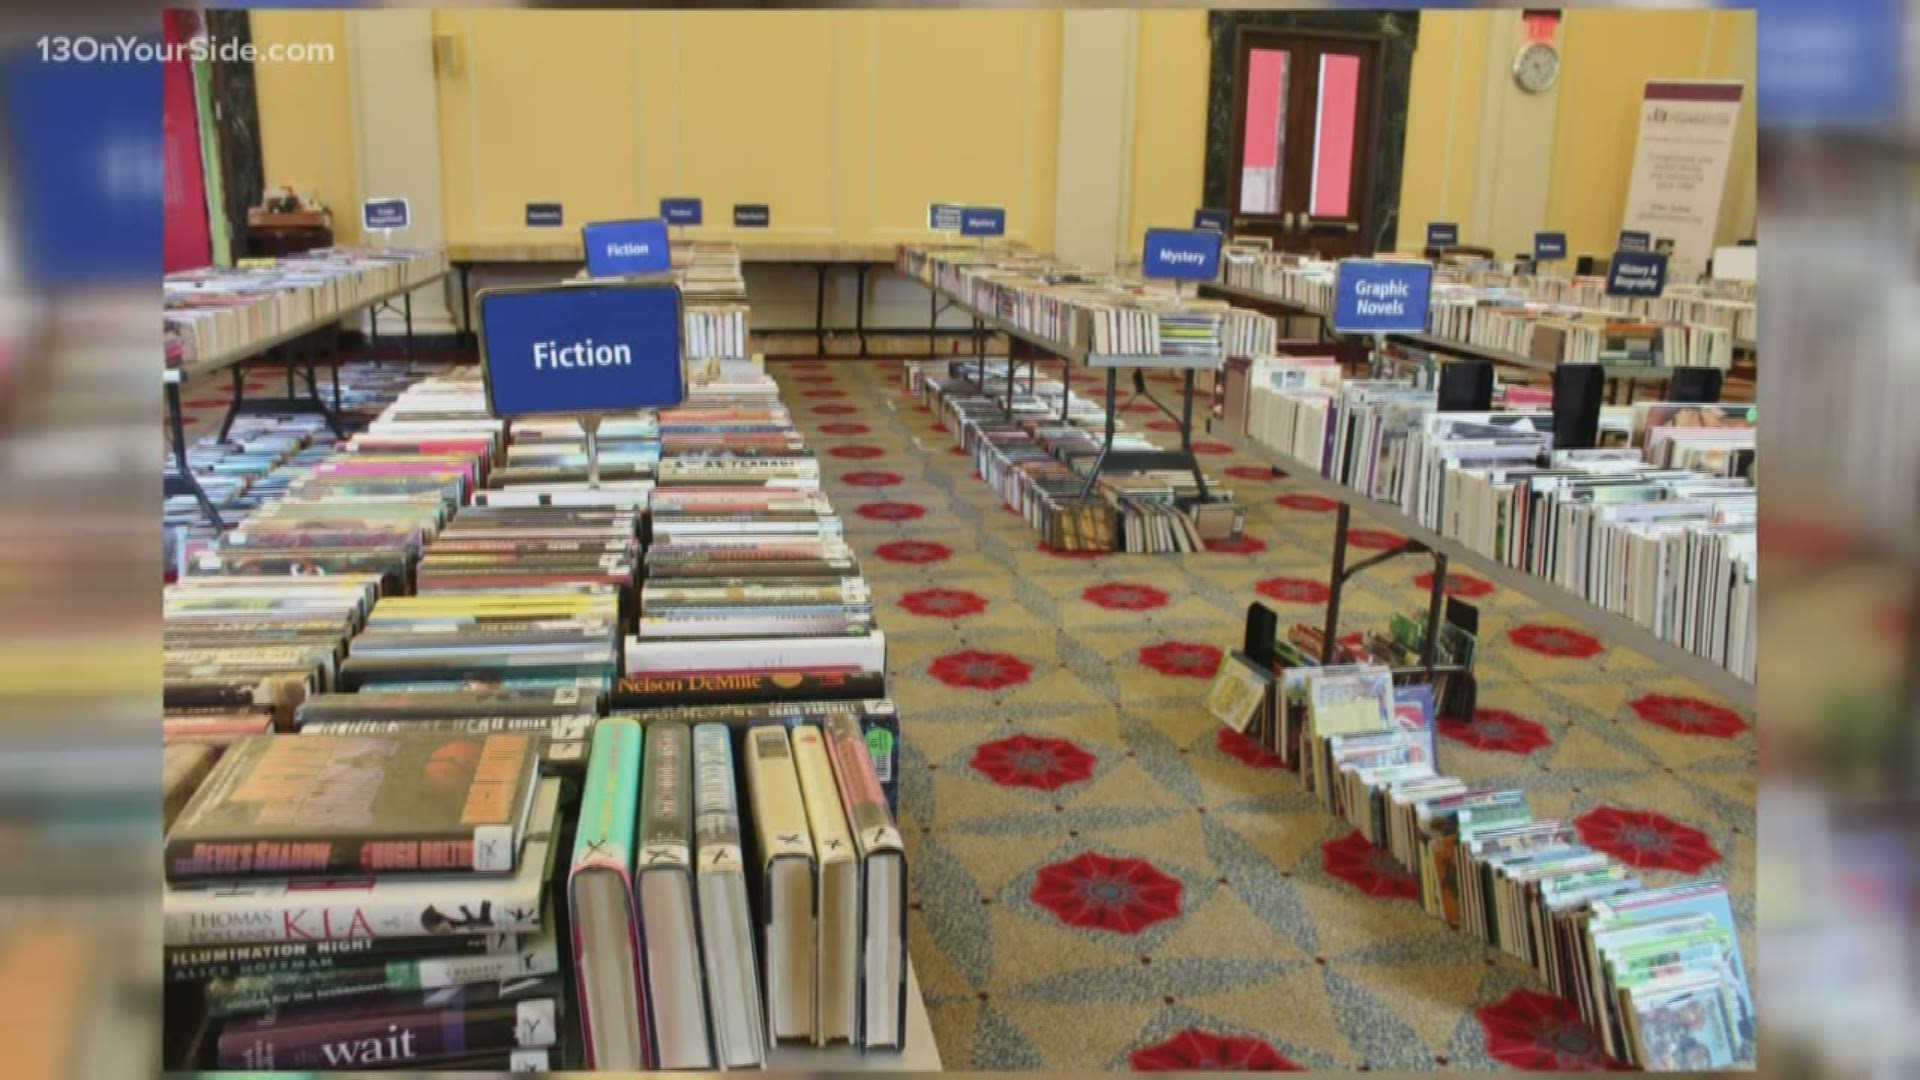 The Grand Rapids Public Library is kicking off their Friends of the Library Book Sale on Oct. 19-20.